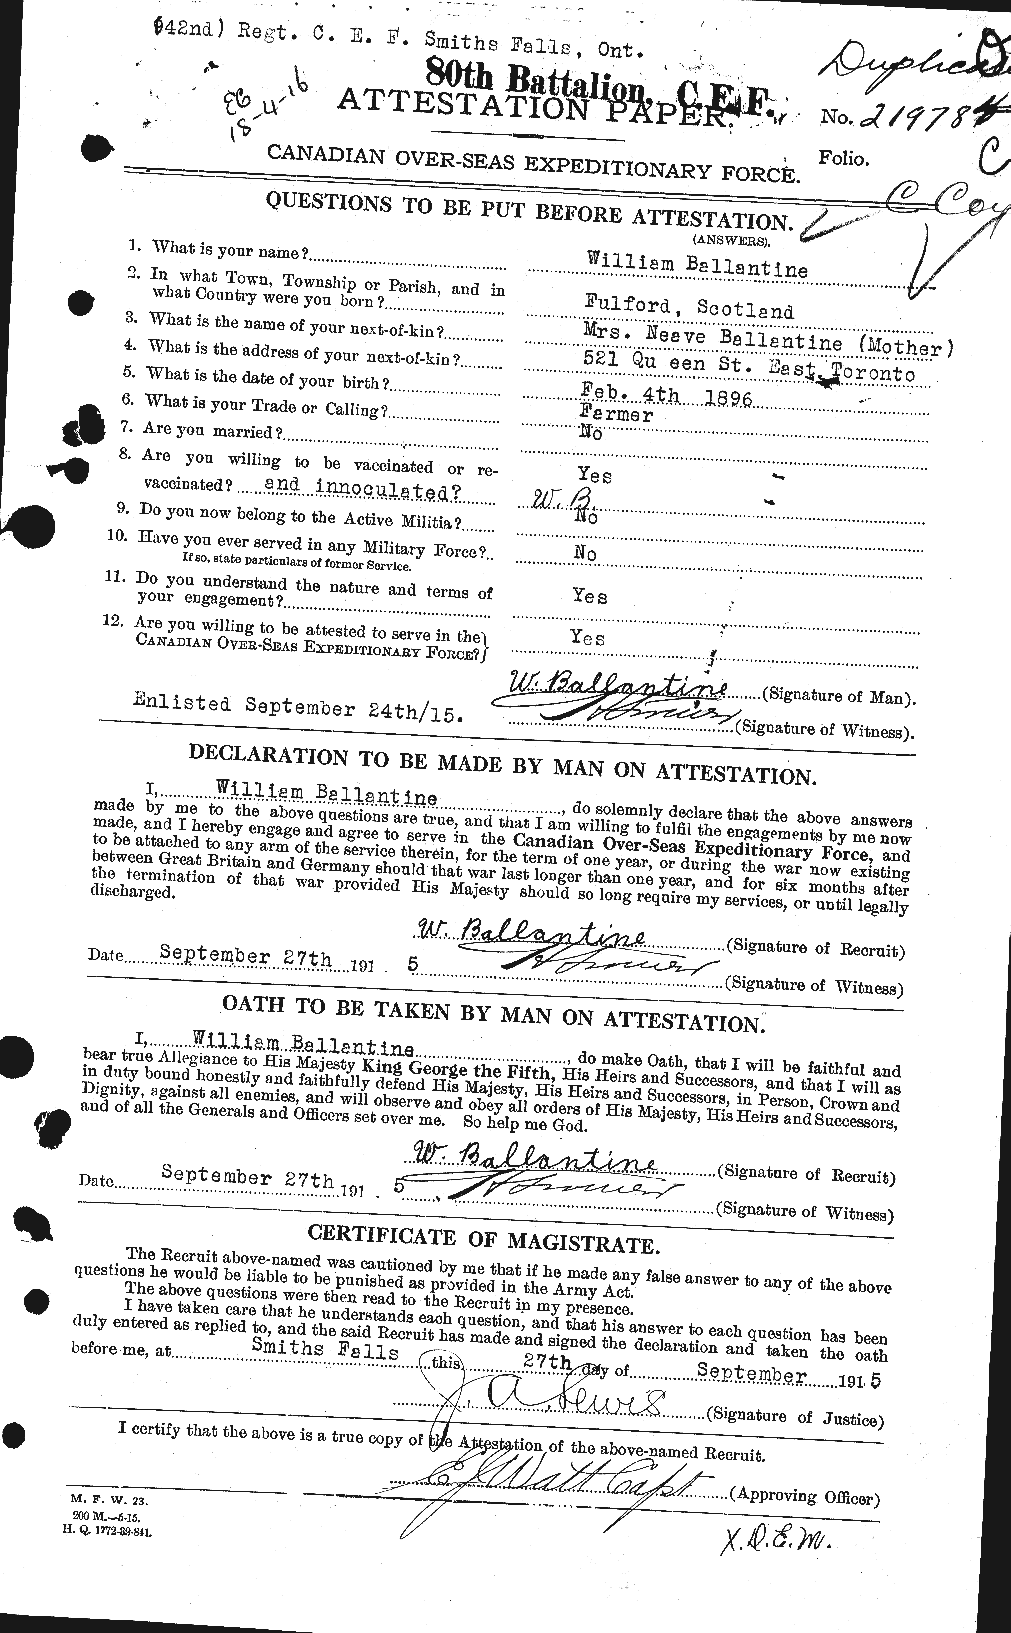 Personnel Records of the First World War - CEF 219840a